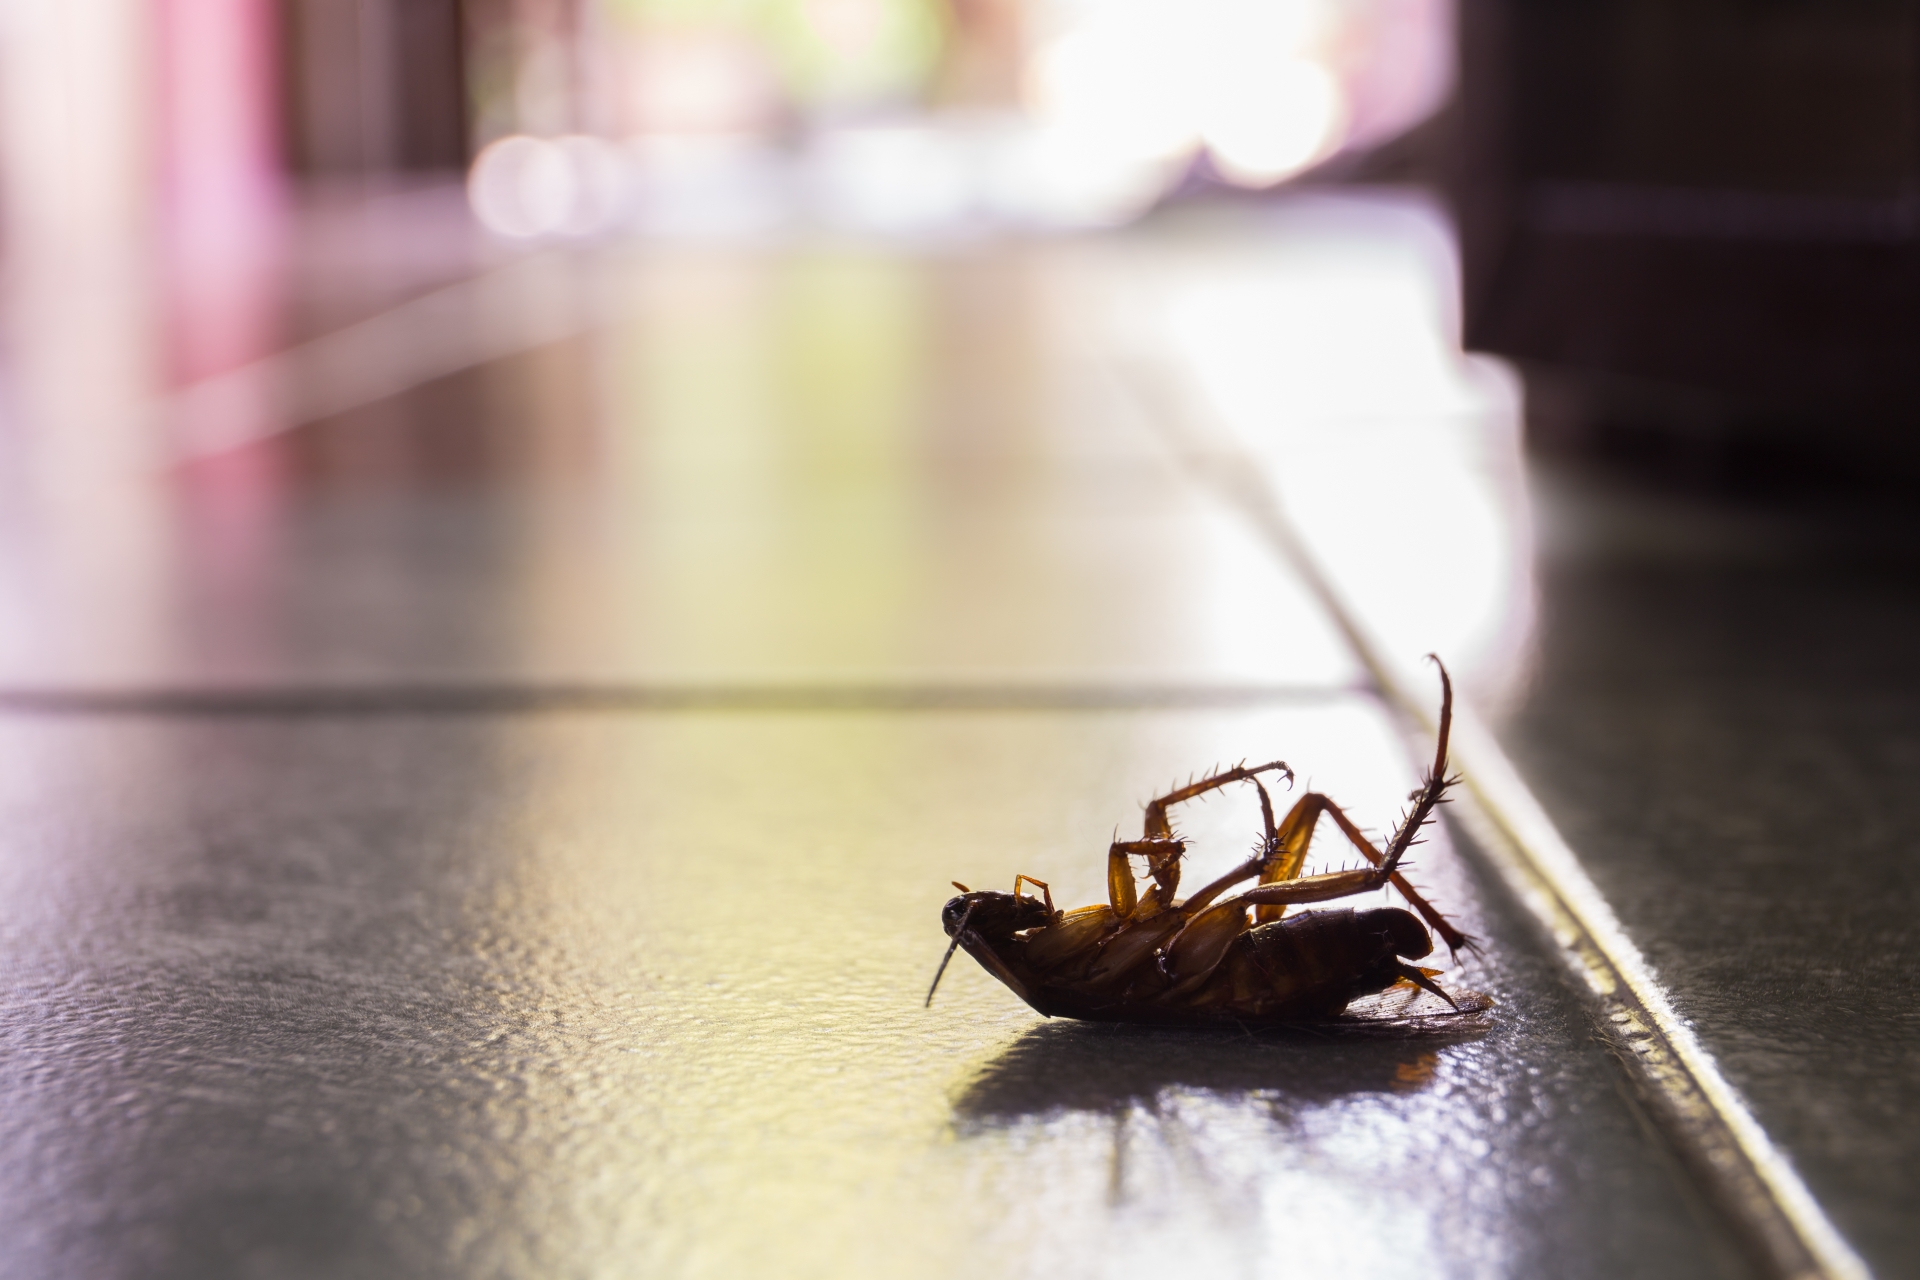 Cockroach Control, Pest Control in Dalston, E8. Call Now 020 8166 9746